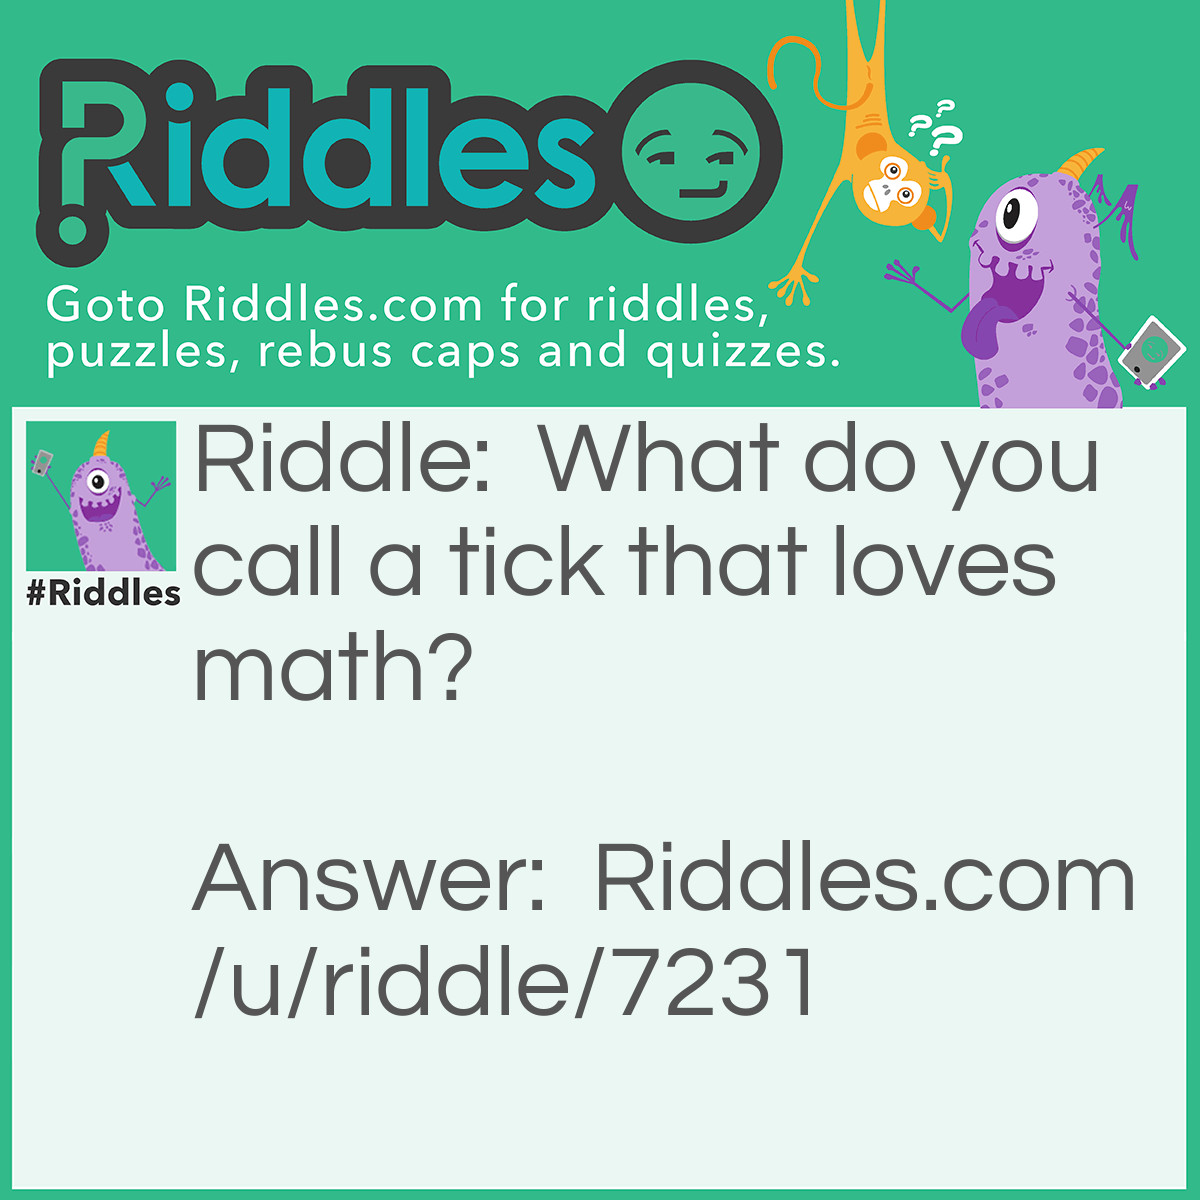 Riddle: What do you call a tick that loves math? Answer: An Arithme-tic.